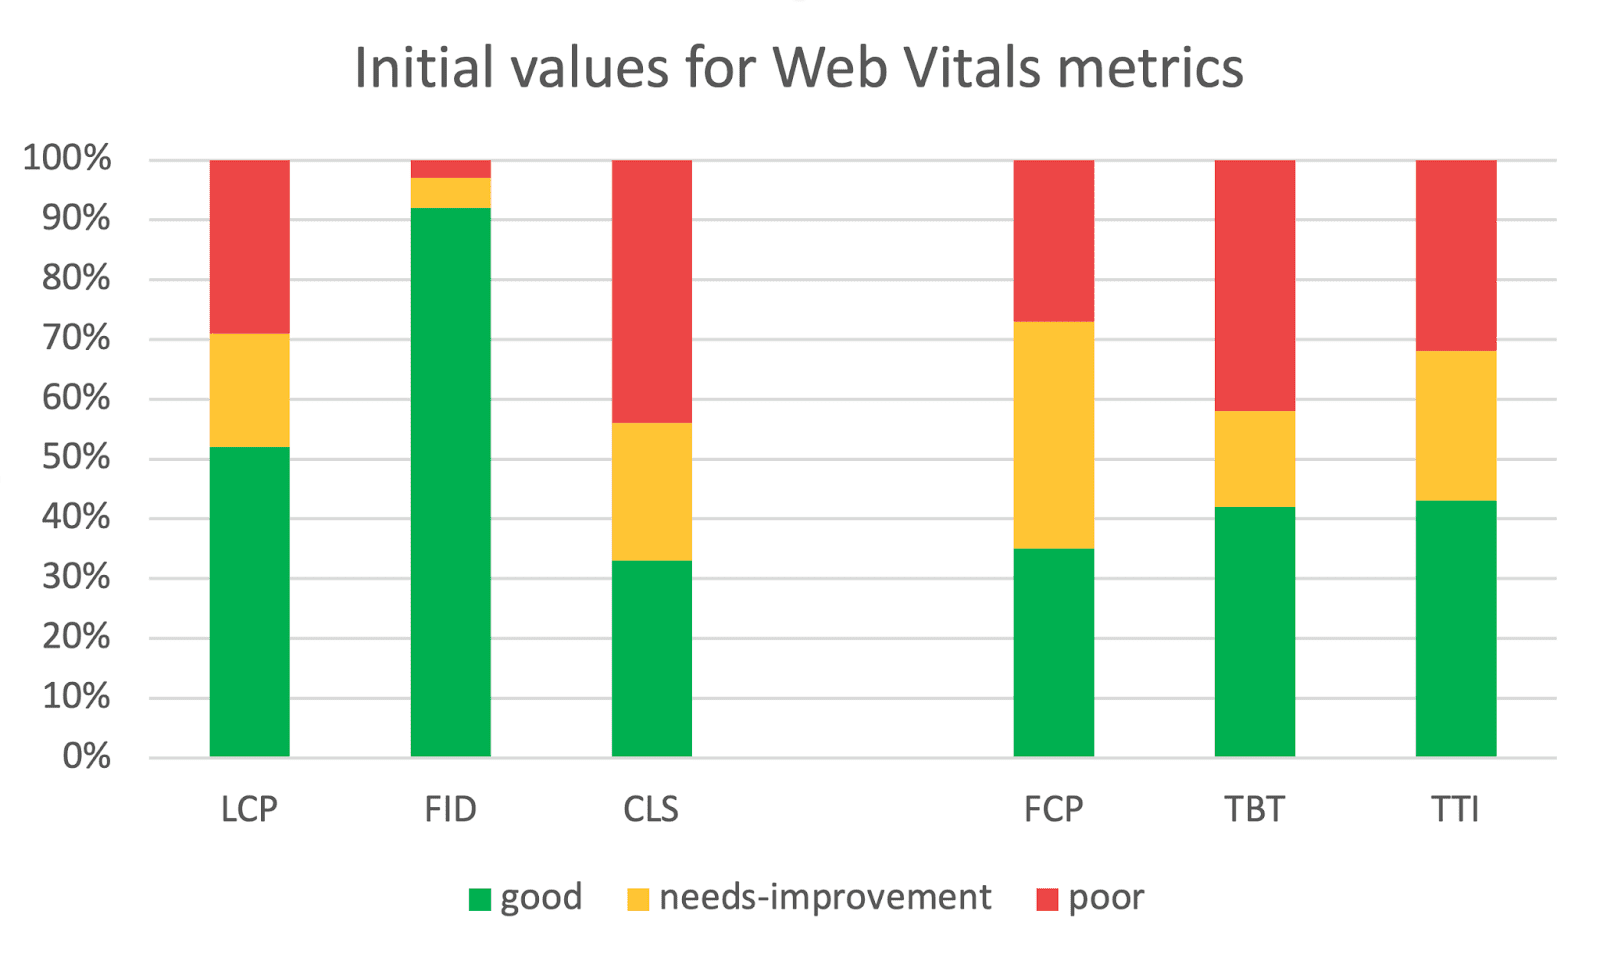 Core Web Vitals before optimization show roughly 1/3 of users in the poor bucket.